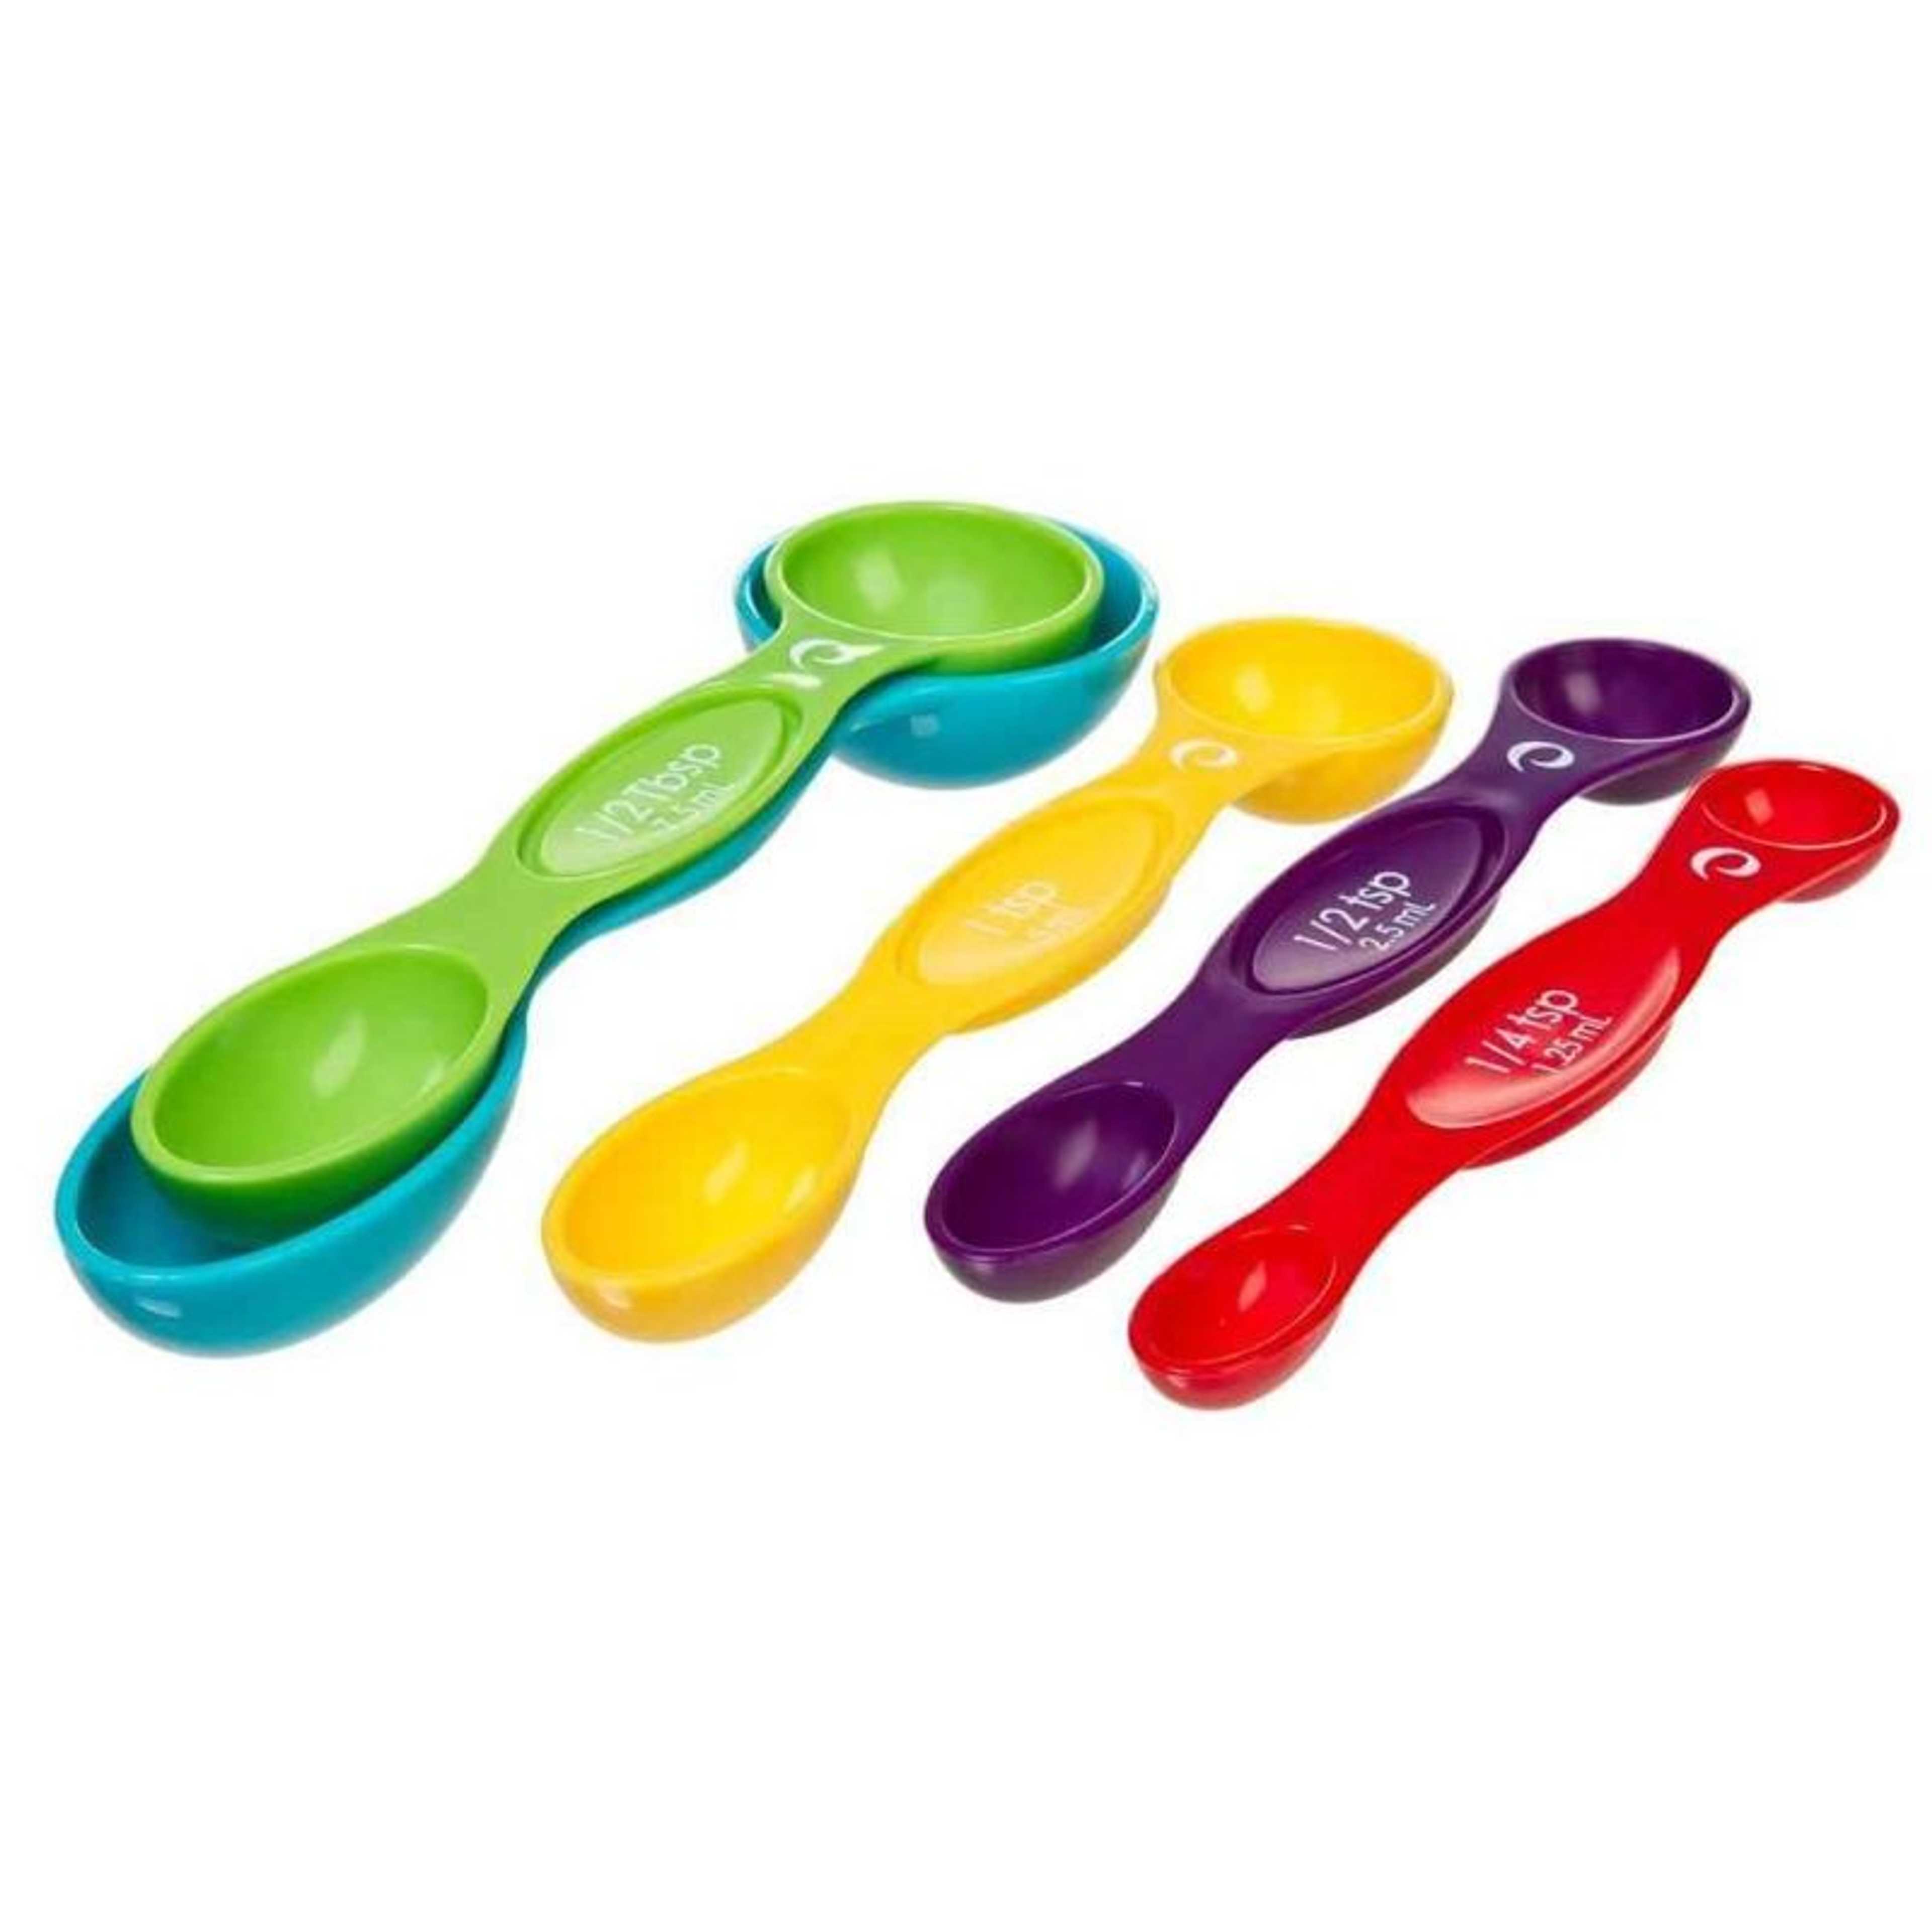 Set of 5 - Random Colors Double Sided Plastic Material Measuring Spoons for Liquid and Dry Ingredients